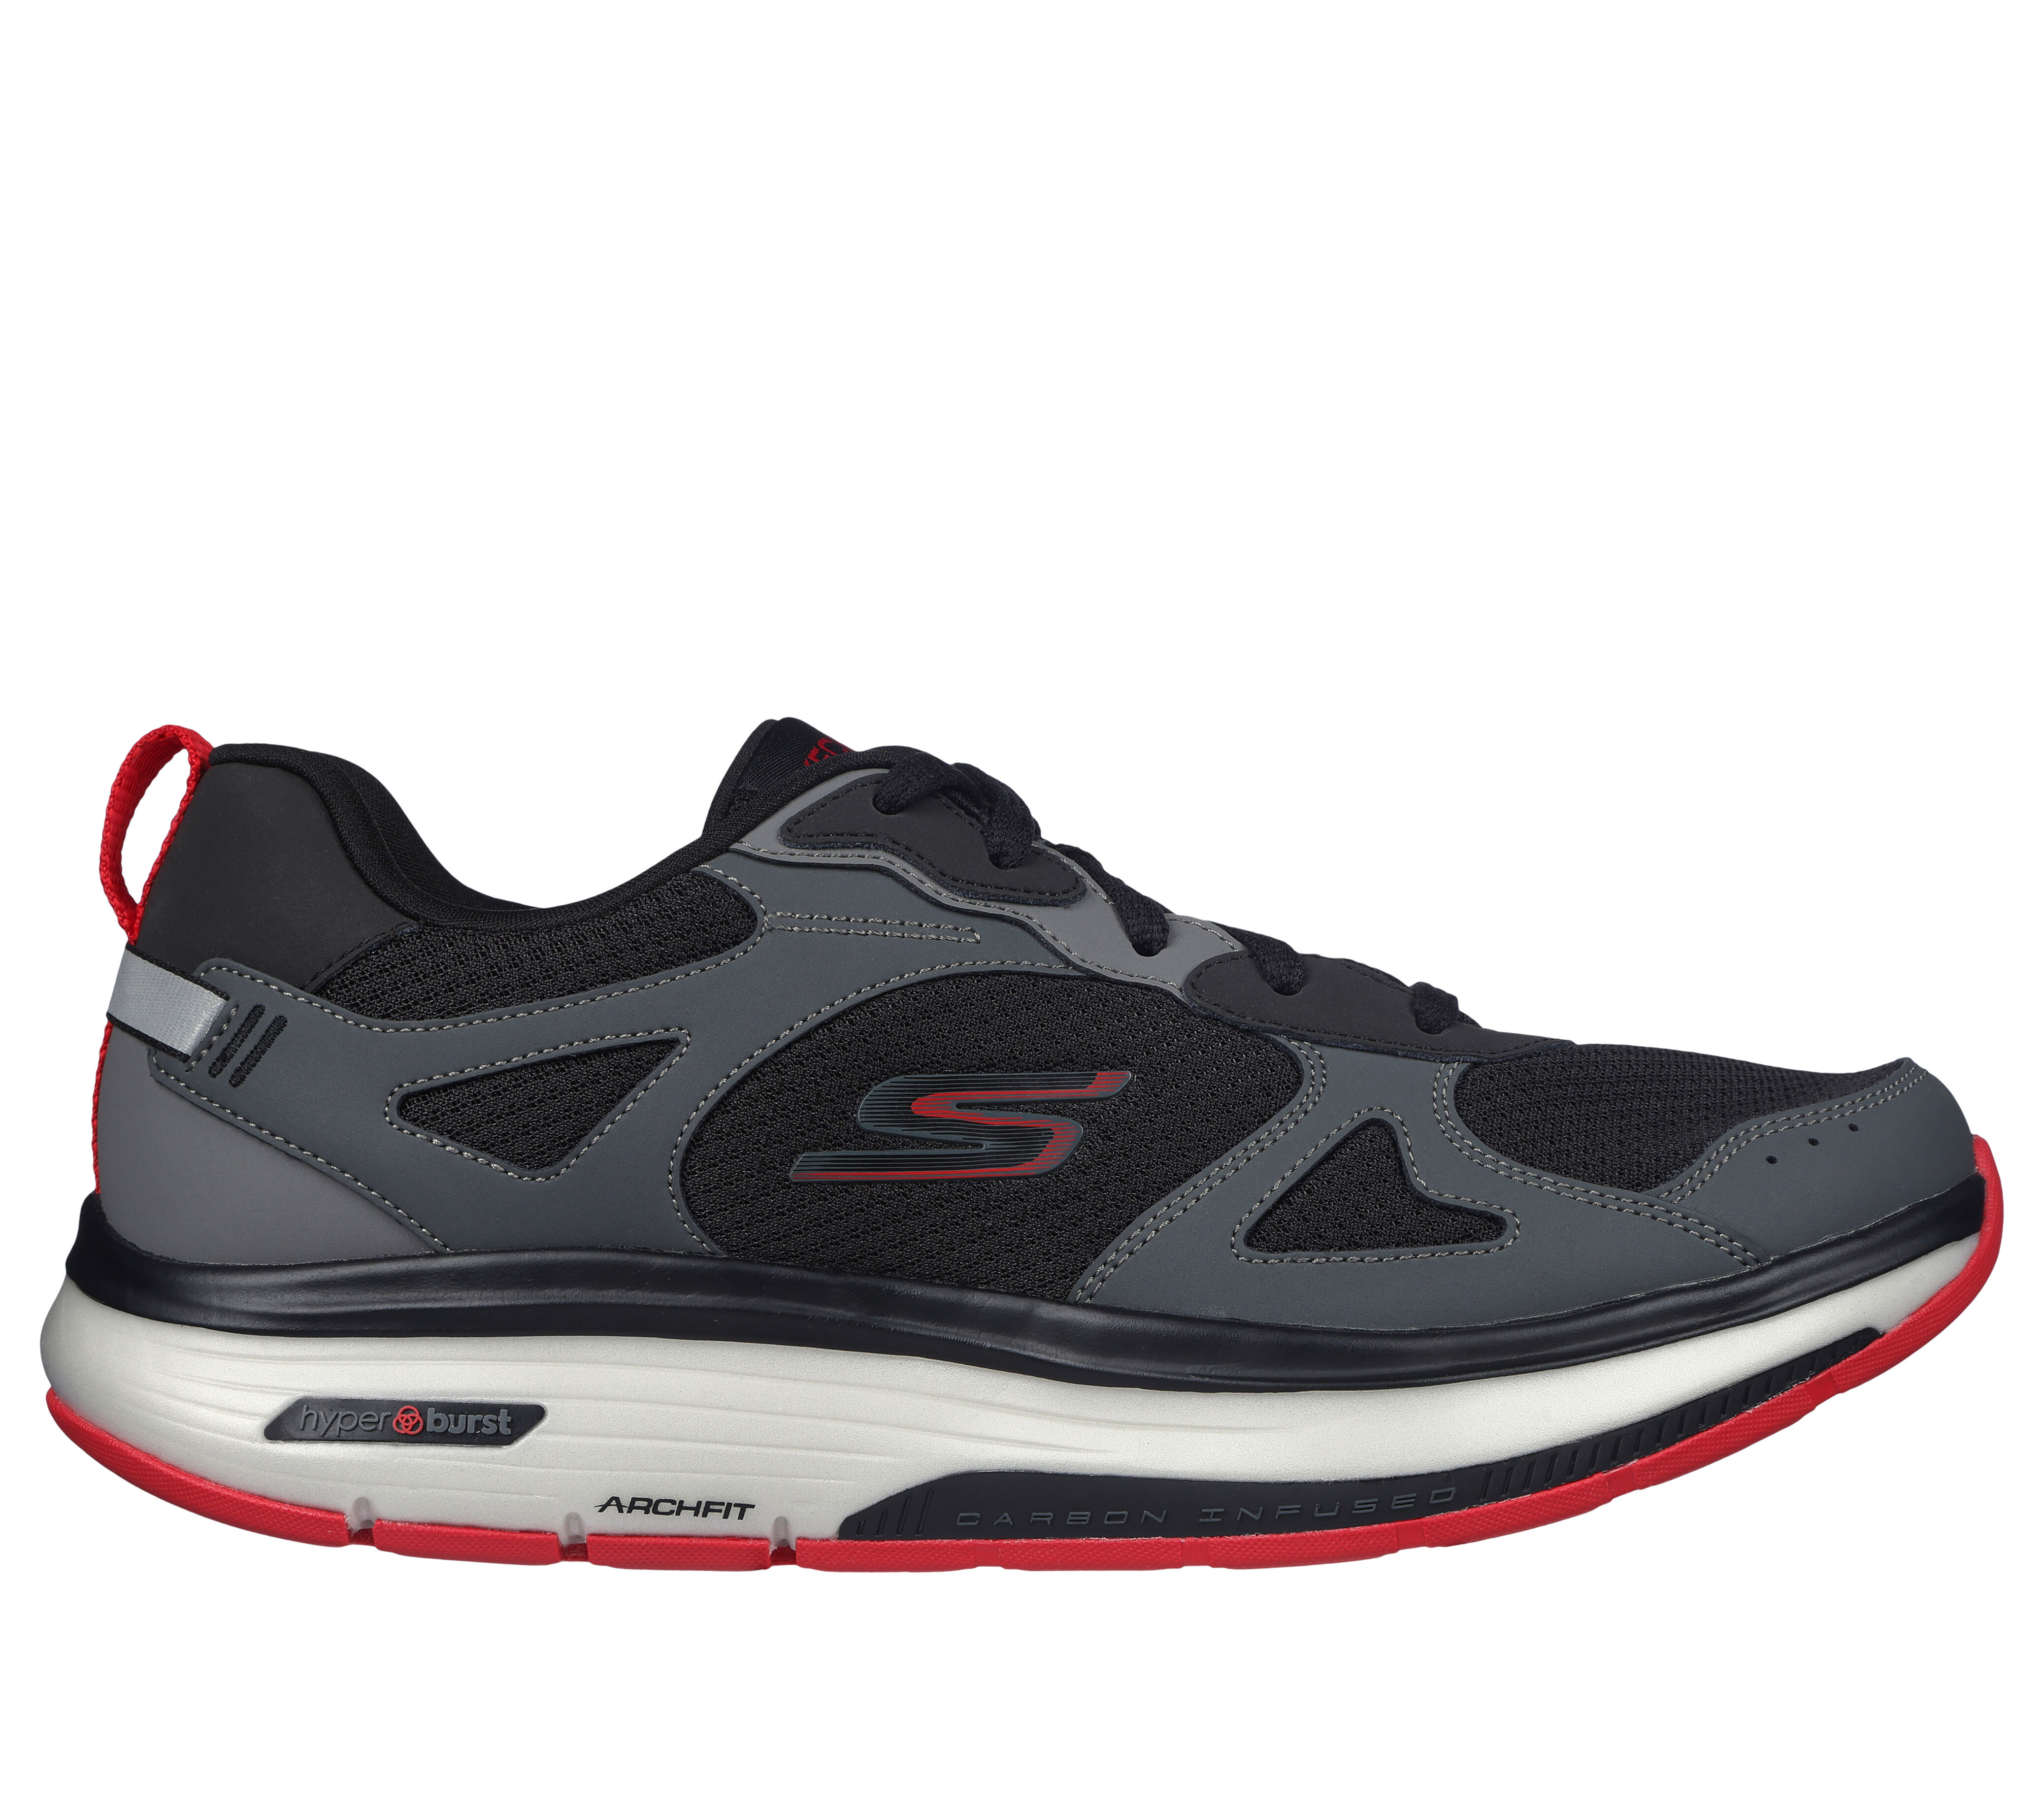 skechers shoes for women new arrival